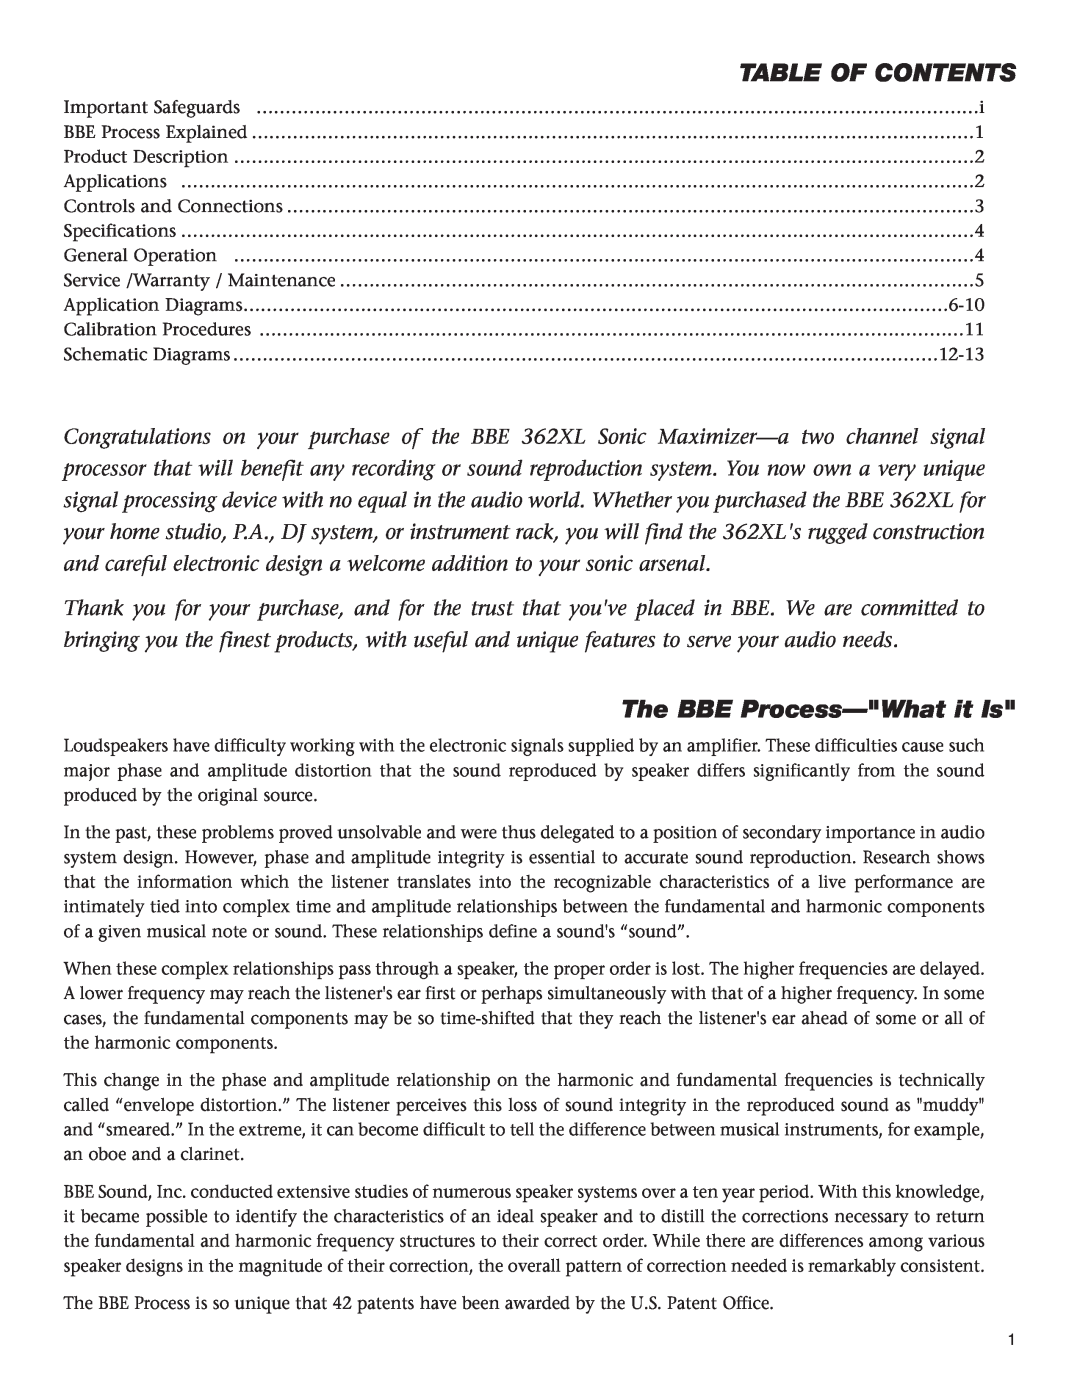 BBE 362XL manual Table Of Contents, The BBE Process-What it Is 